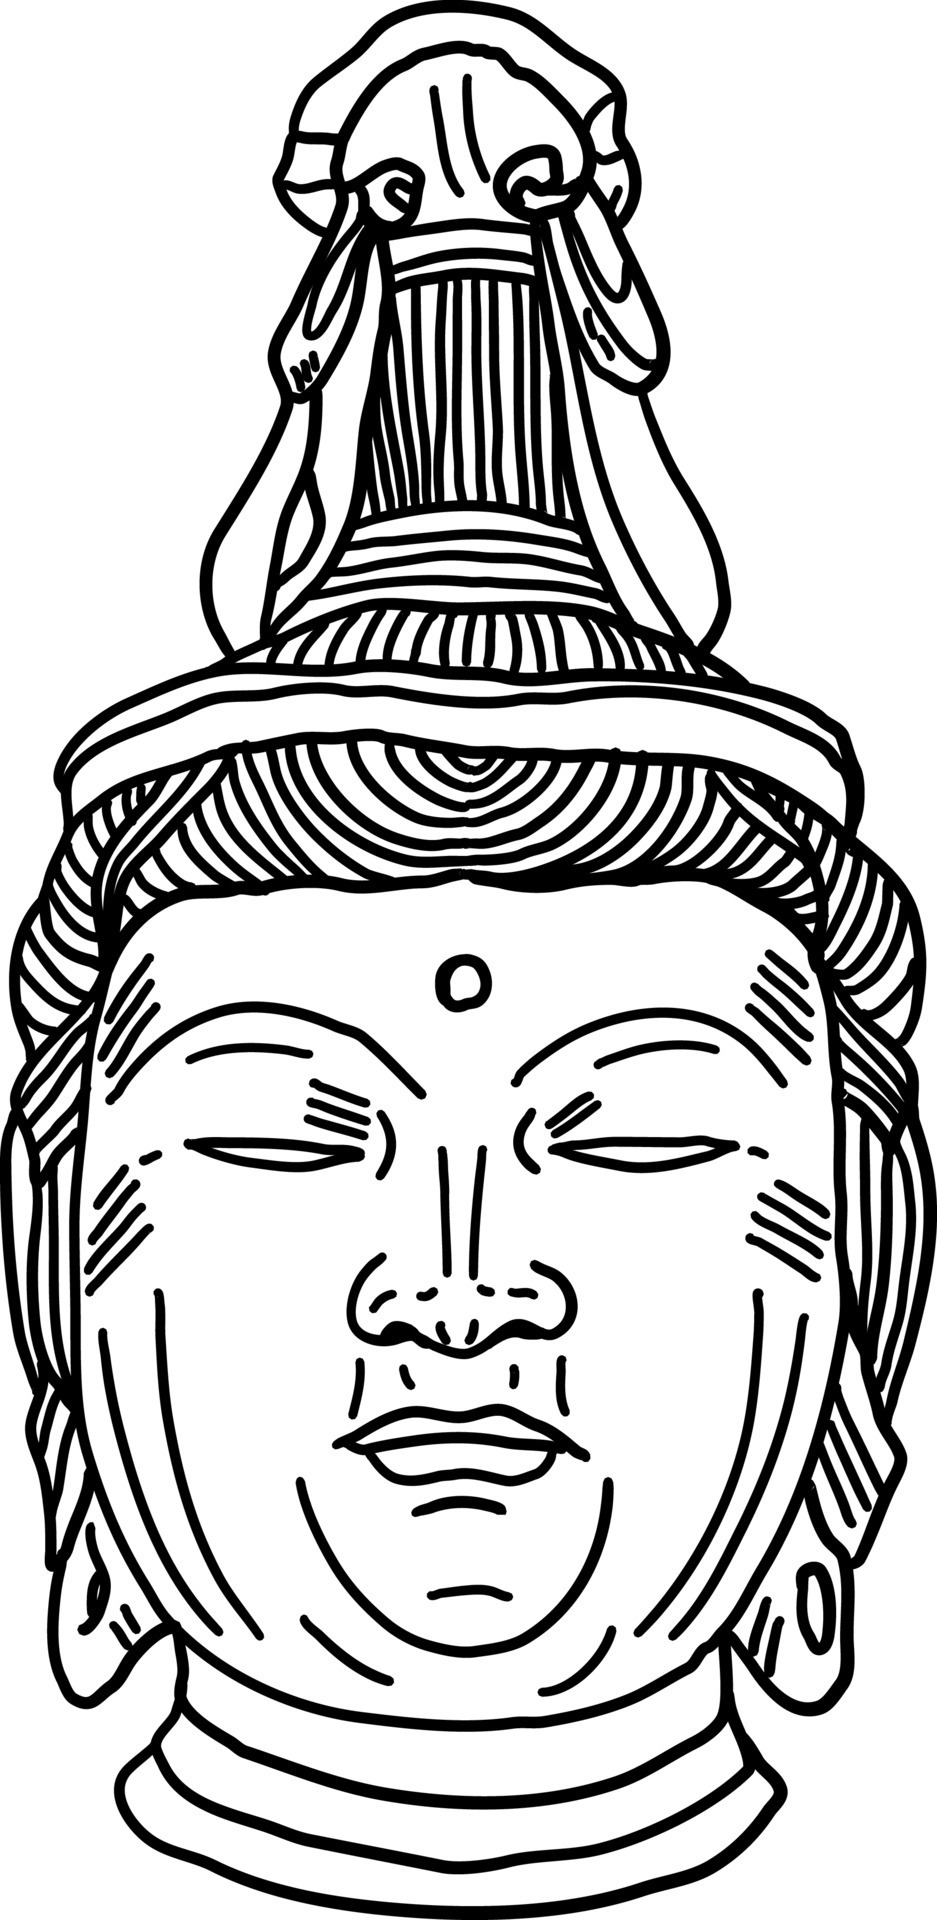 Drawing of a Buddha statue stock vector. Illustration of thailand - 80420436-saigonsouth.com.vn